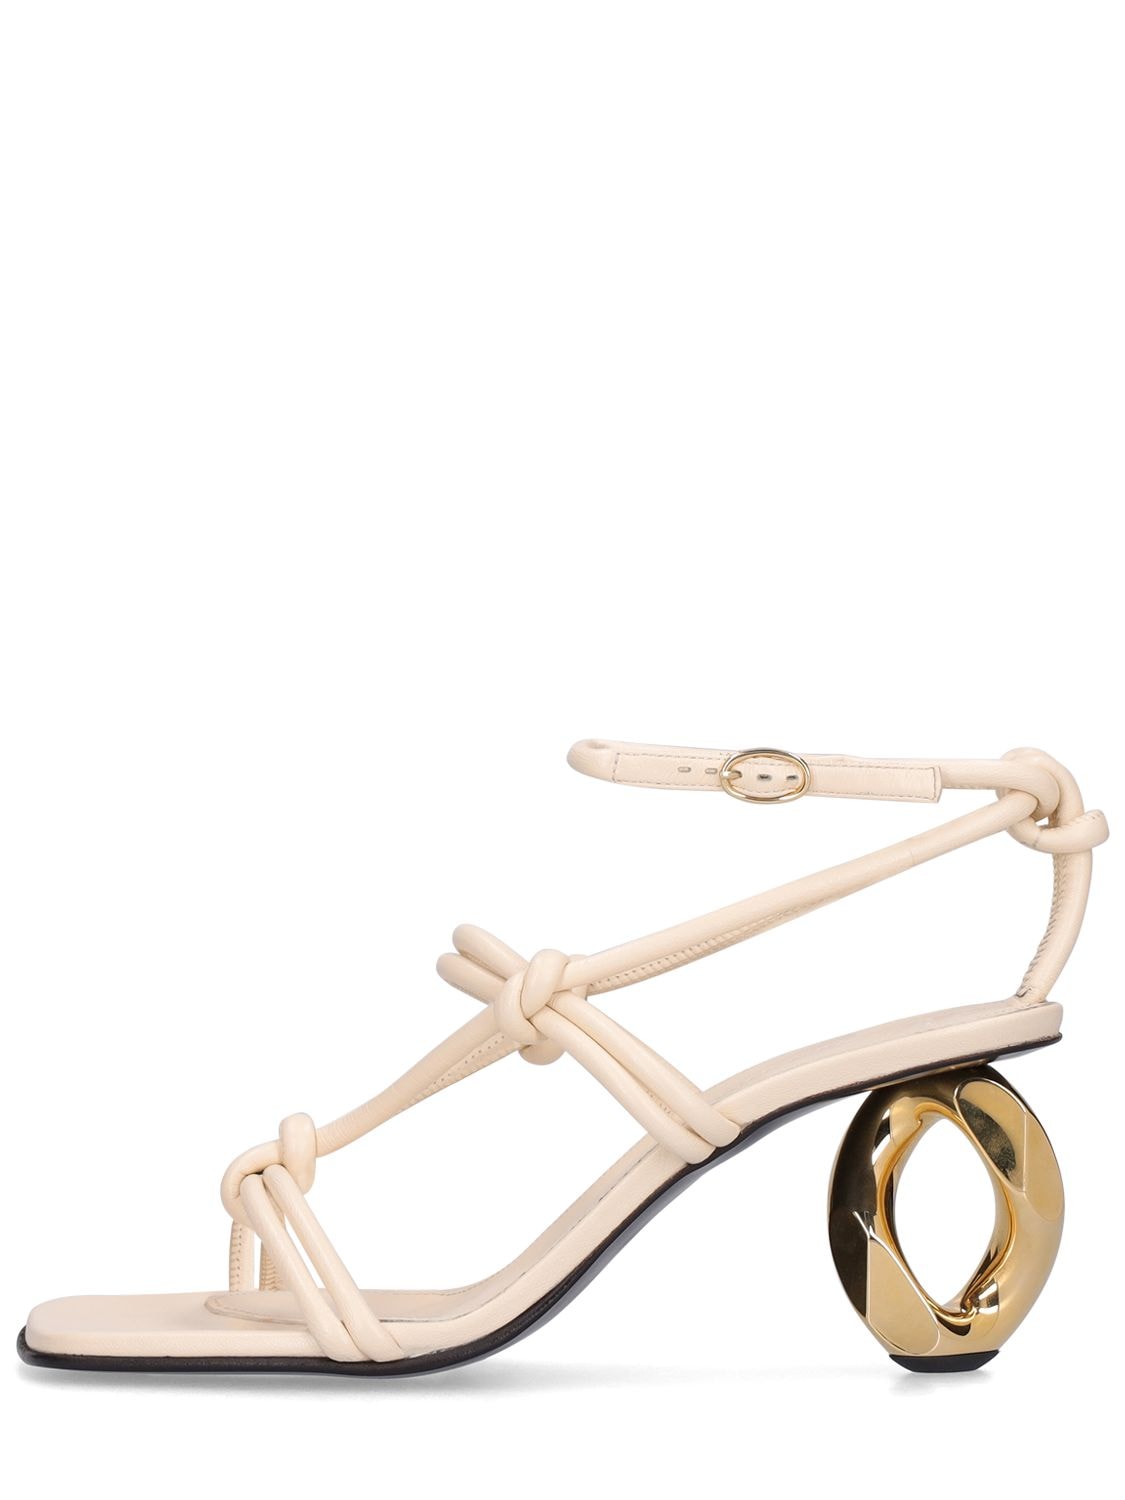 Jw Anderson 75mm Leather Chain Heel Sandals In Cream